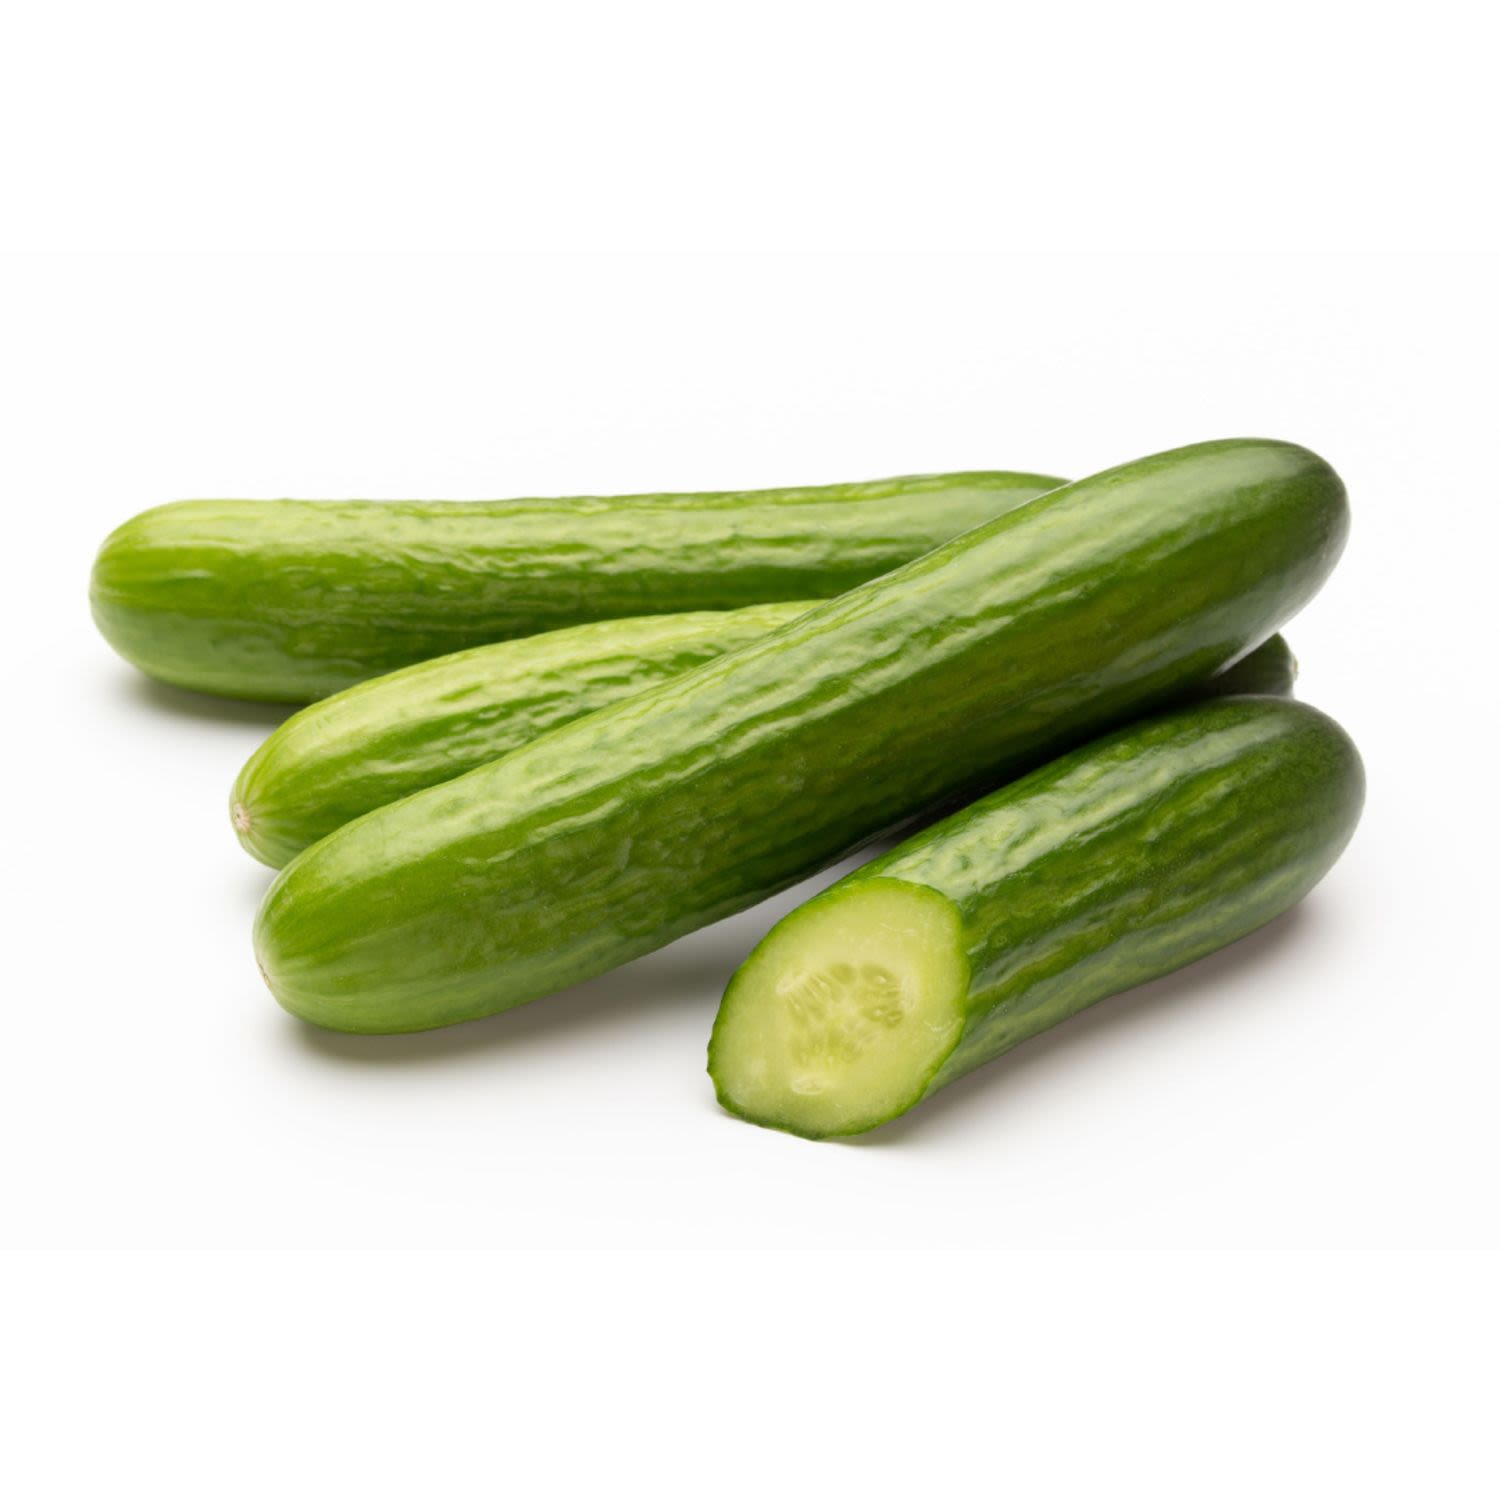 Qukes Baby Cucumbers Punnet 250 grams, 1 Each